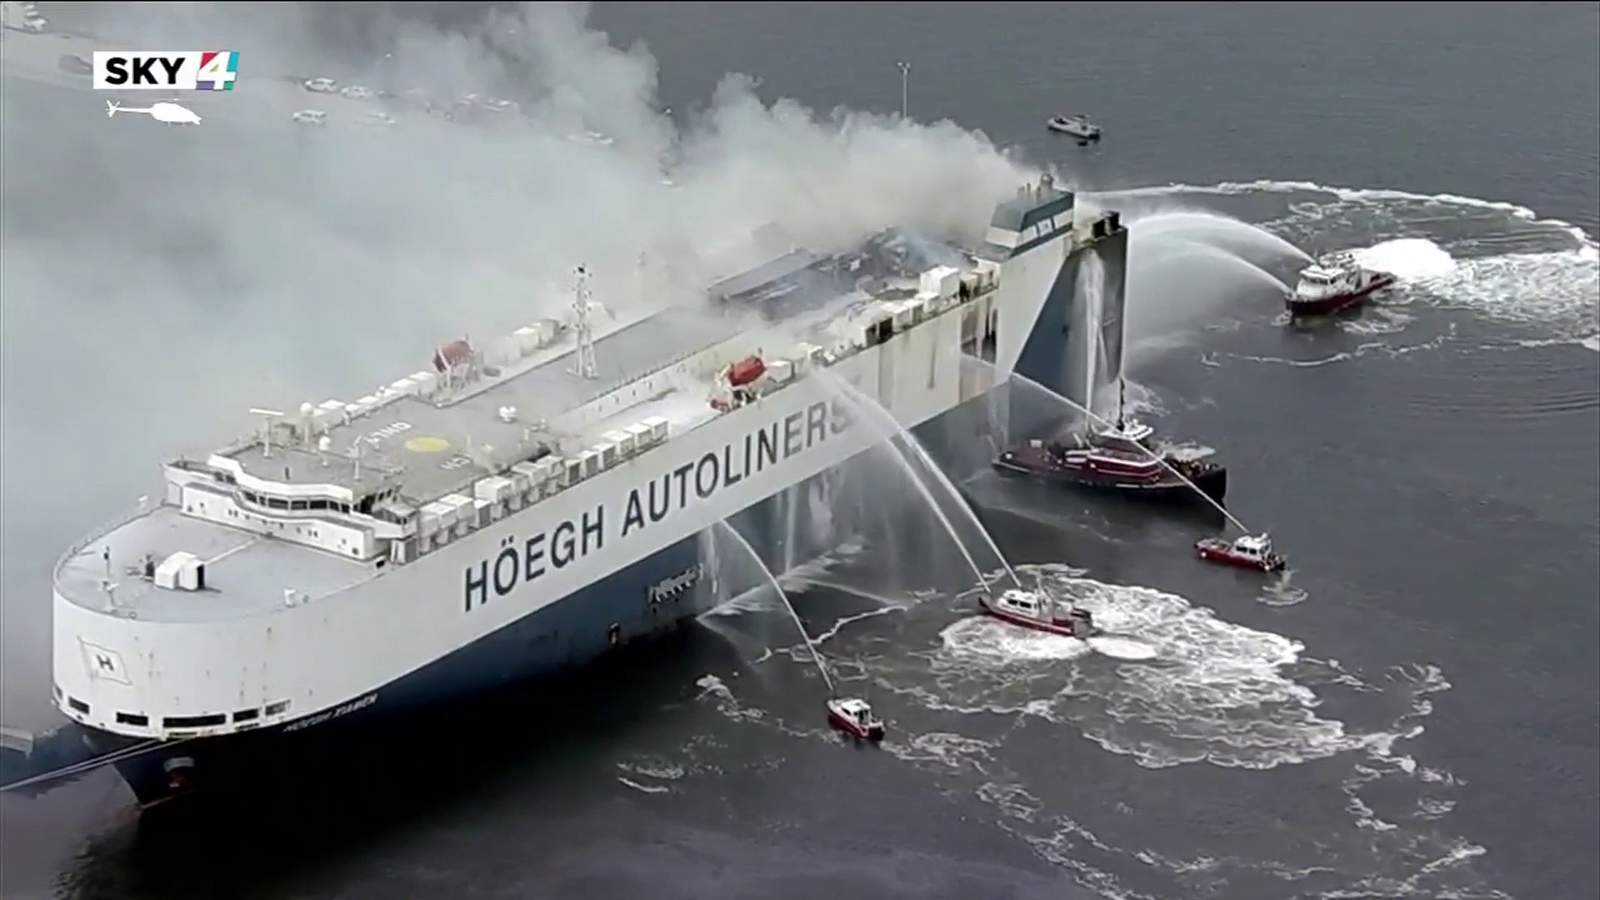 10 Jacksonville firefighters sue after cargo ship fire, explosion